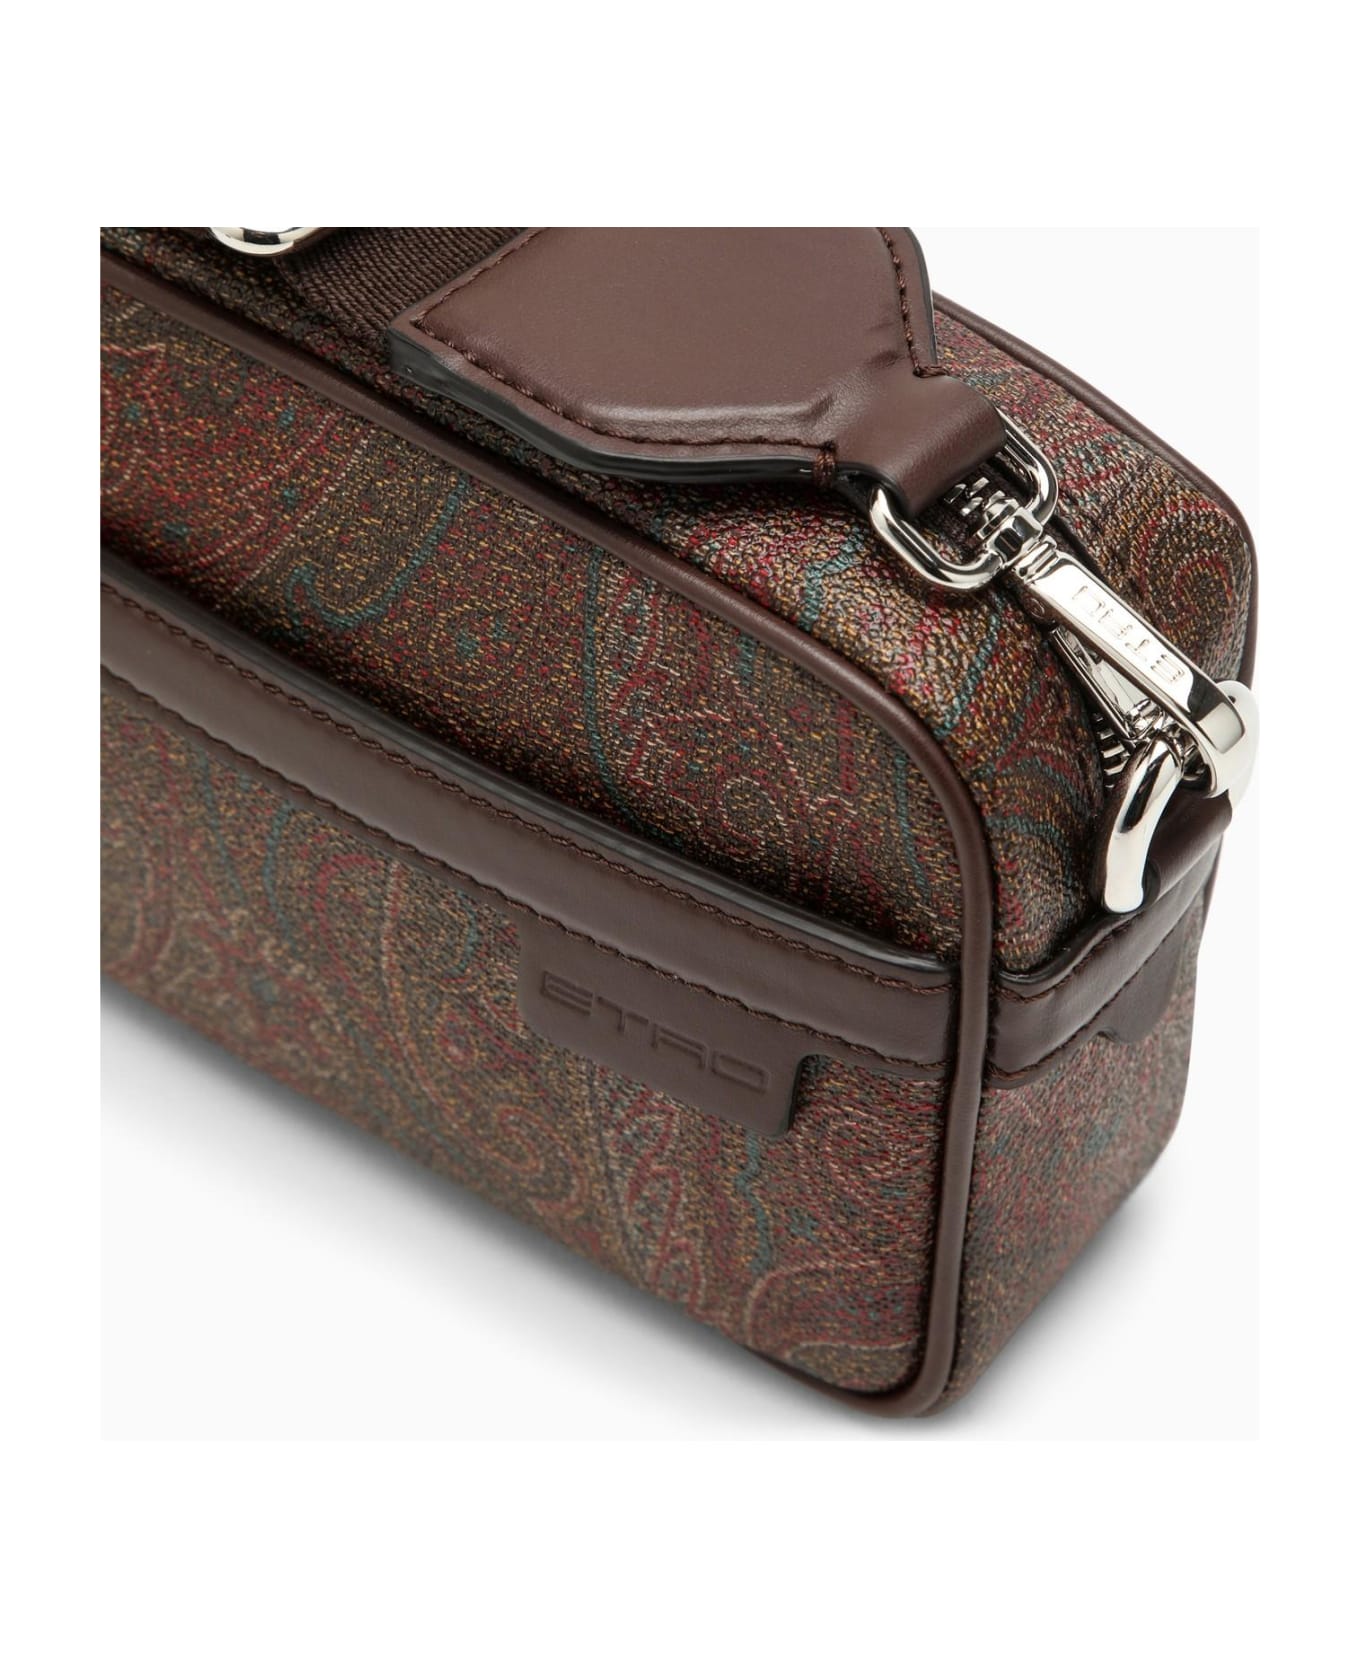 Etro Paisley Mini Bag In Coated Canvas - BROWN